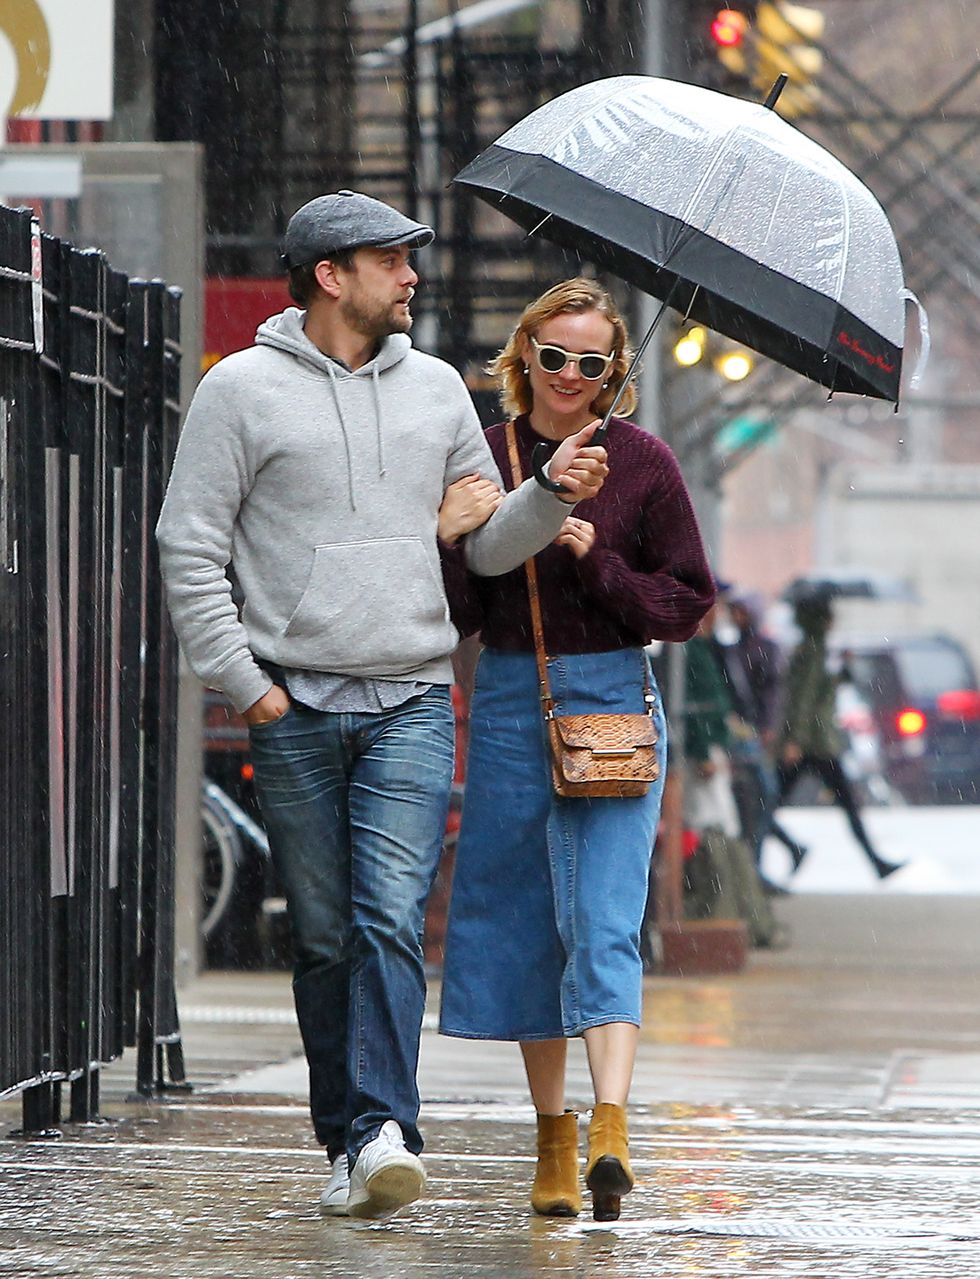 Diane Kruger and Joshua Jackson walking in the rain in New York